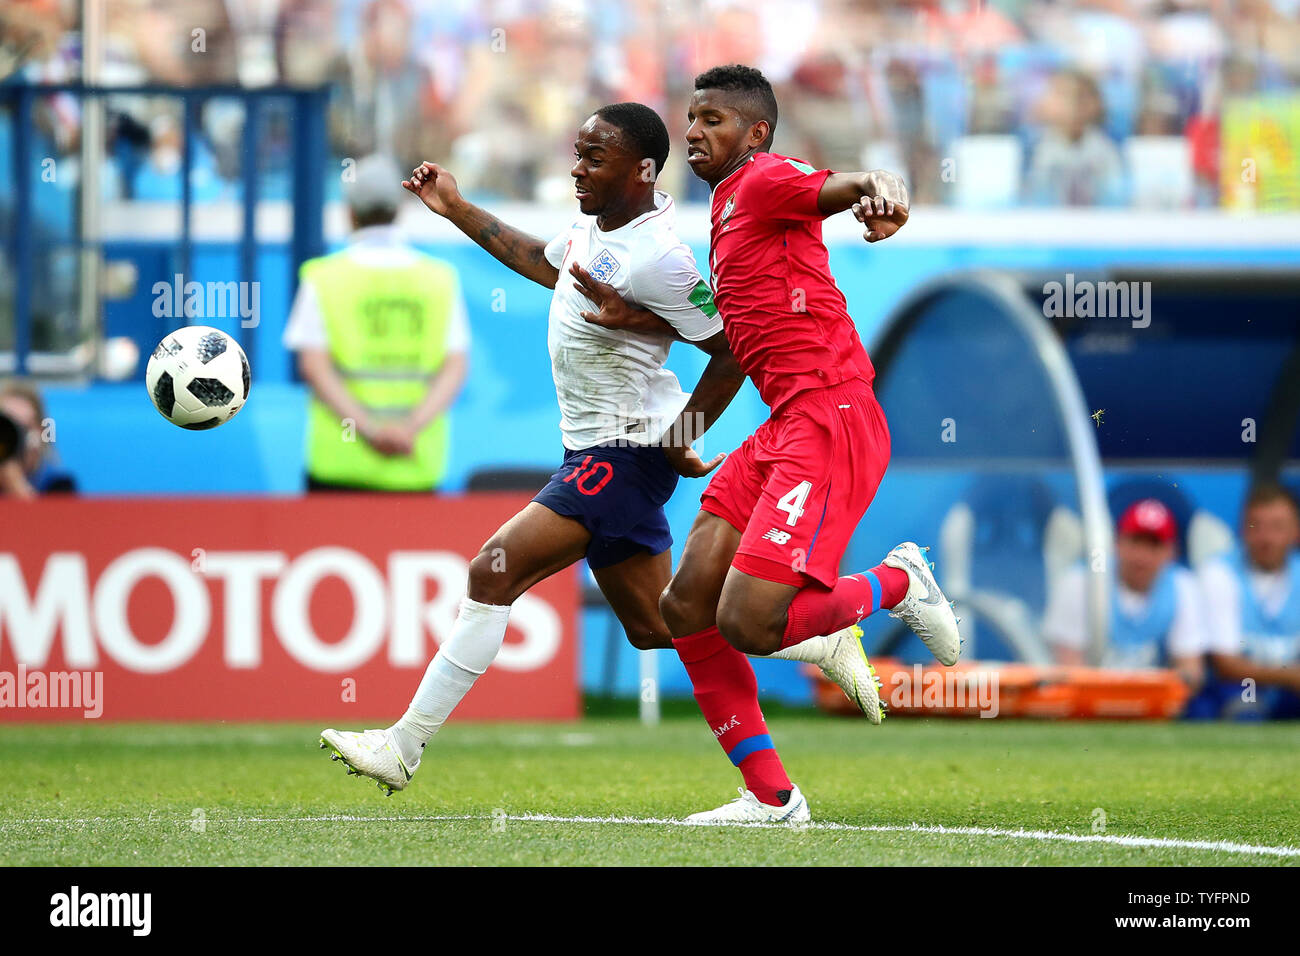 Raheem Sterling (L) of England competes for the ball with Fidel Escobar of Panama during the 2018 FIFA World Cup Group G match at the Nizhny Novgorod Stadium in Nizhny Novgorod, Russia on June 24, 2018. Photo by Chris Brunskill/UPI Stock Photo